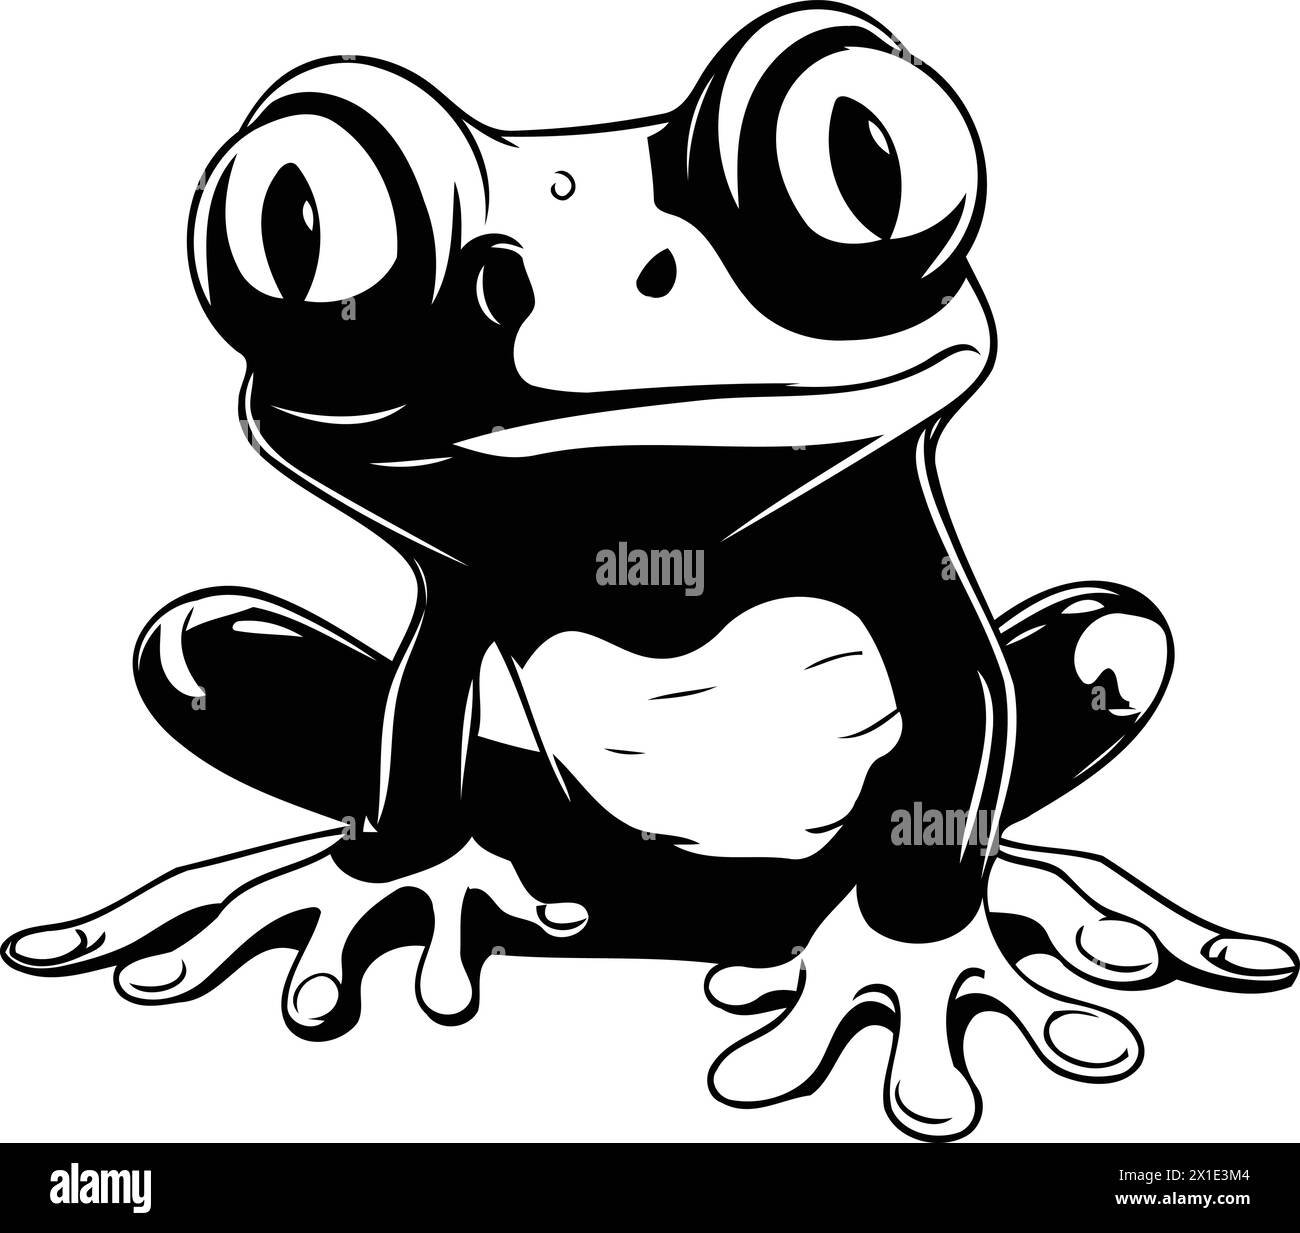 illustration of a cute cartoon green frog on a white background. Stock Vector